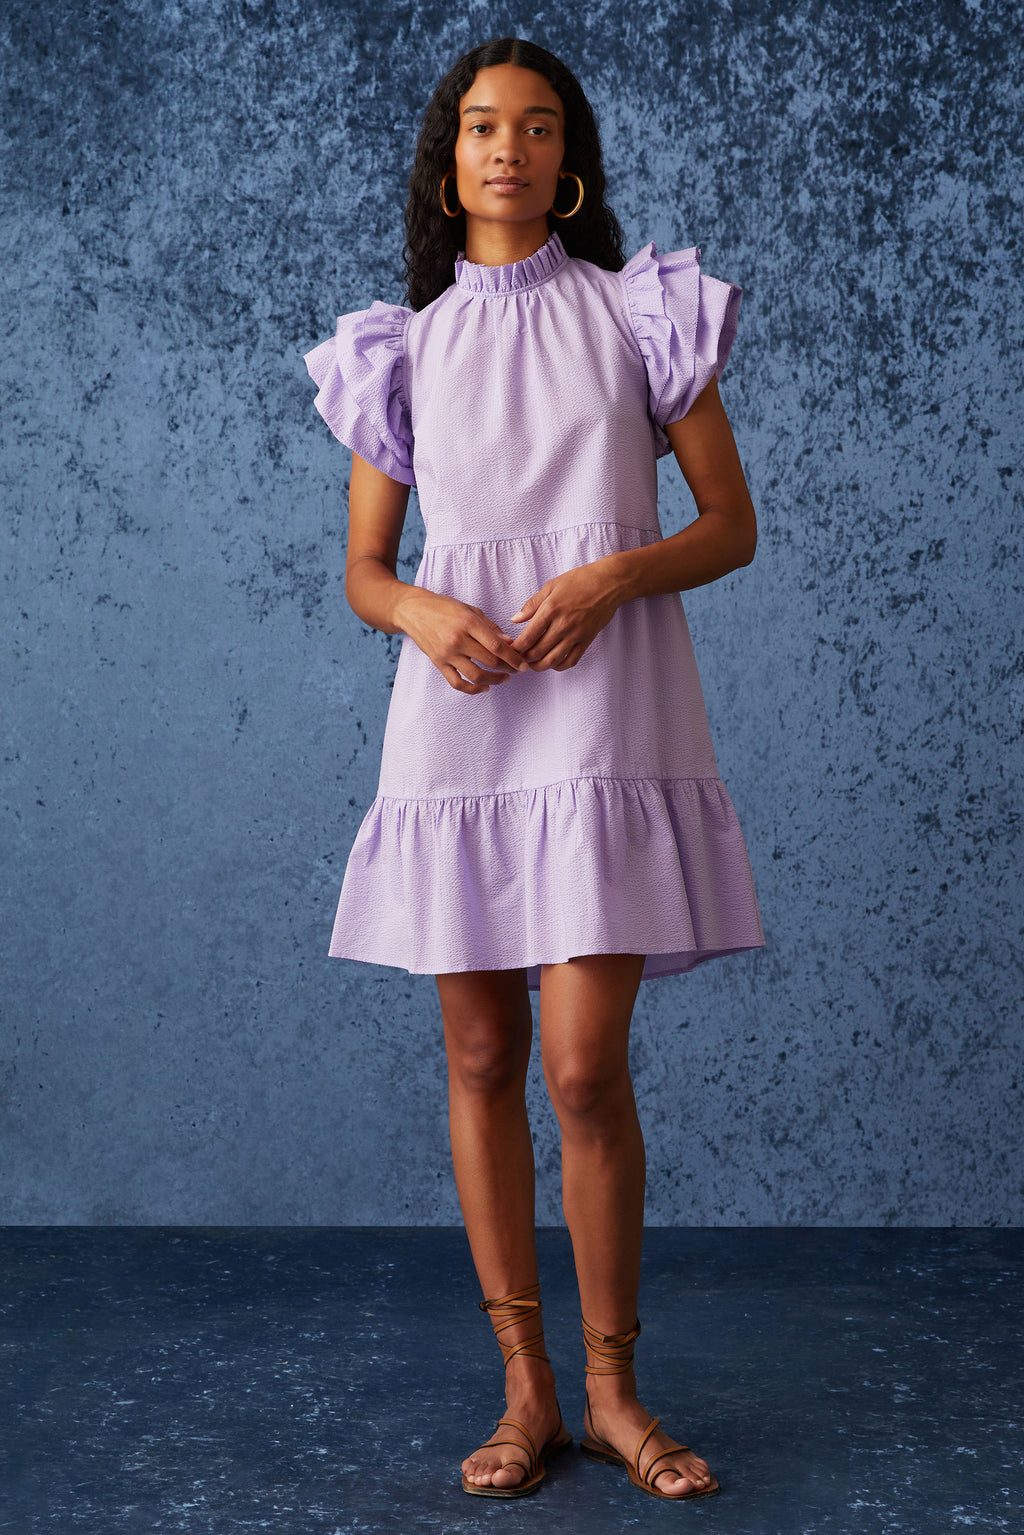 Short dress with short tiered ruffle sleeves and a high ruffled neckline in a light purple